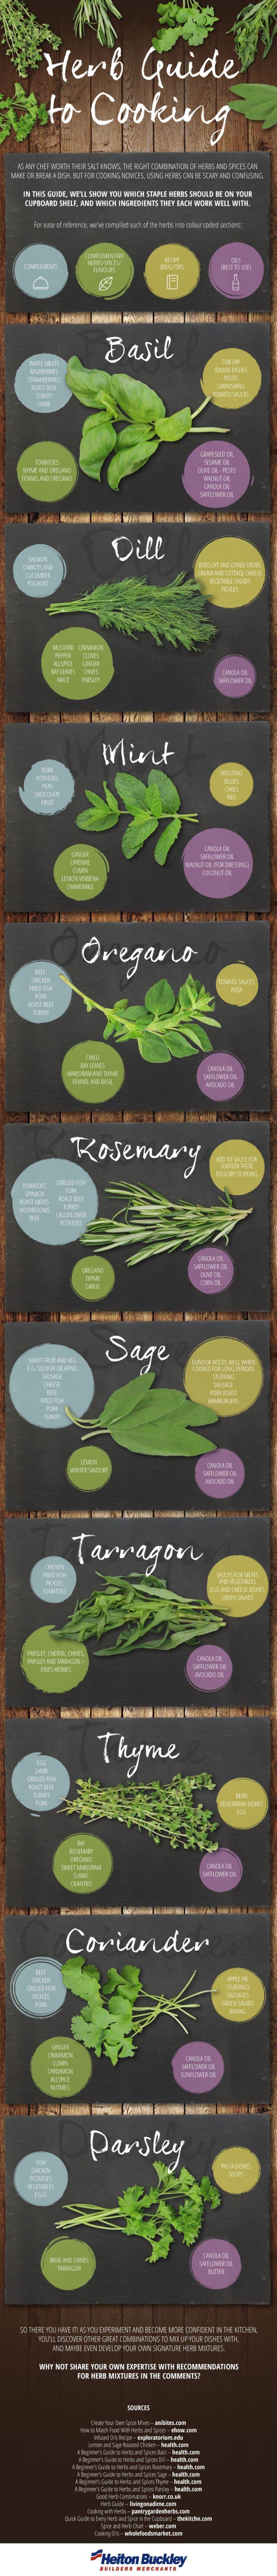 How To Use Herbs In Your Cooking